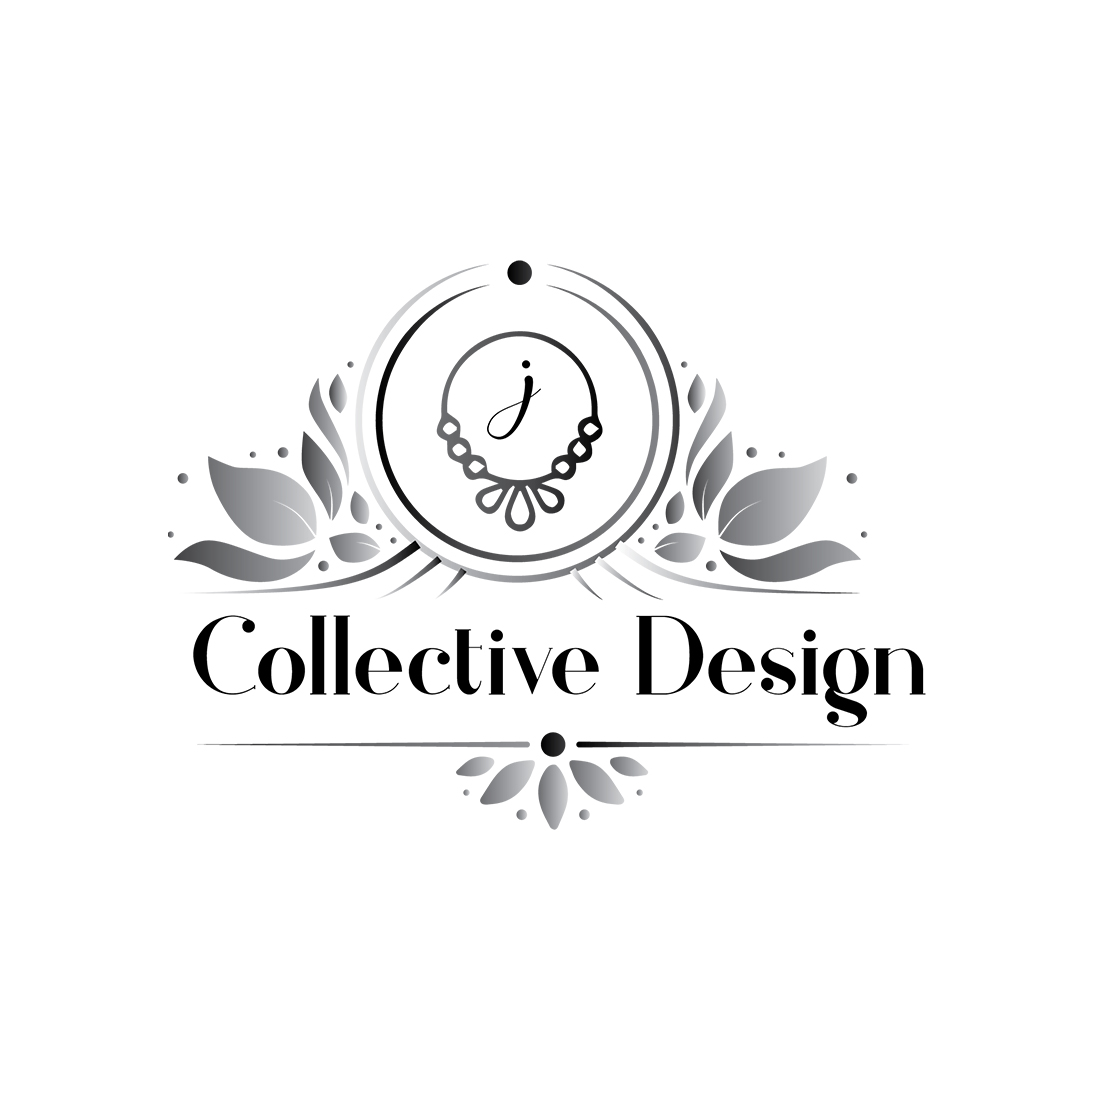 Logo design for a home decoration business final concept, I am happy to see  your feedback on this! what do you think? : r/logodesign